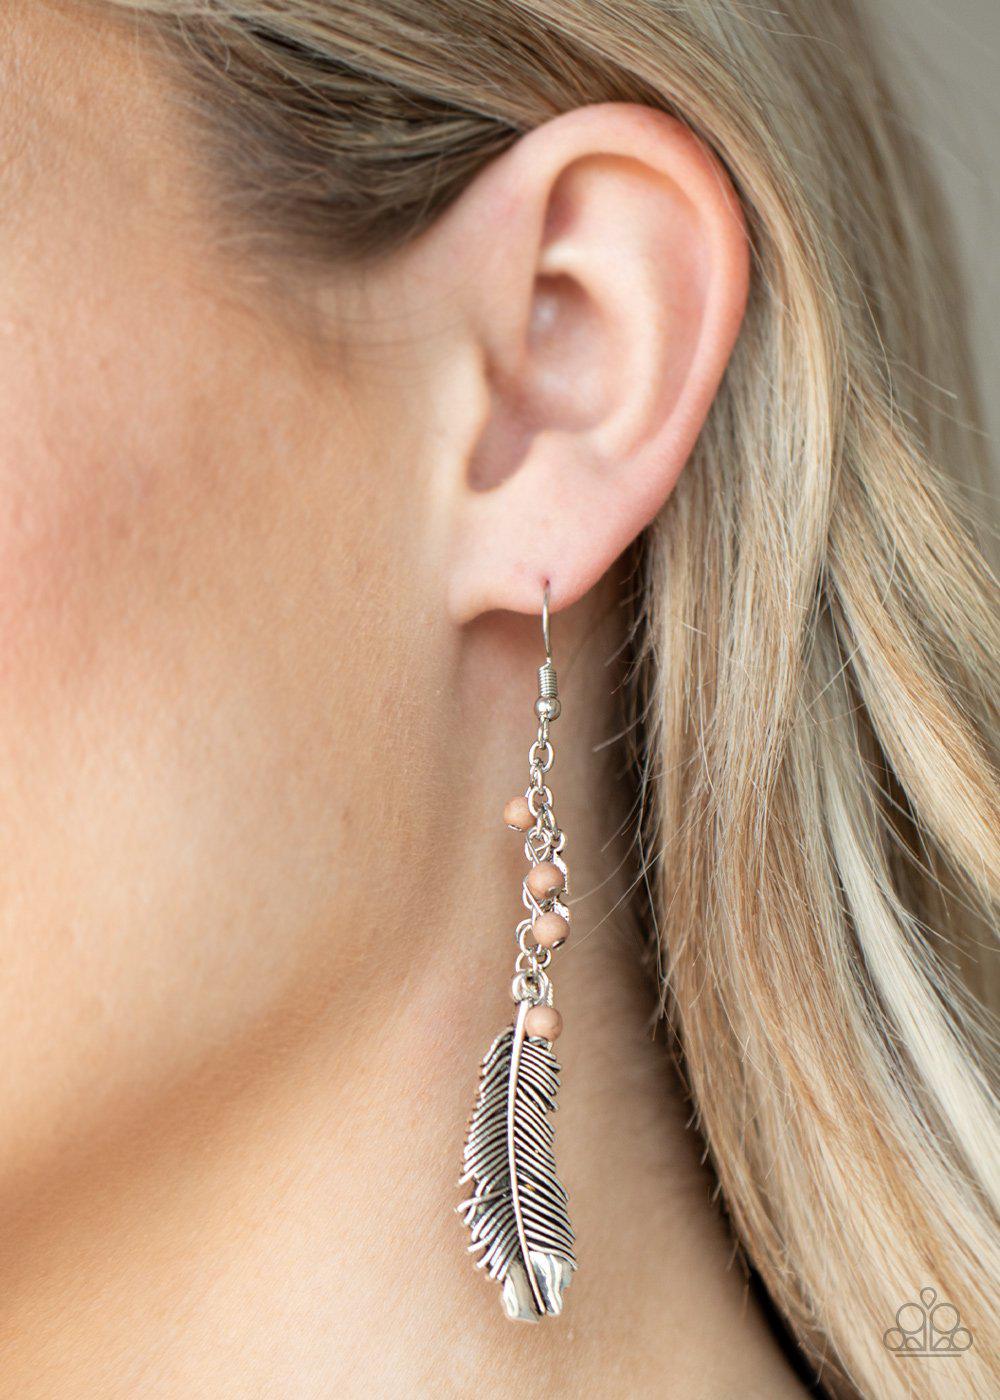 Find Your Flock Brown and Silver Feather Earrings - Paparazzi Accessories-CarasShop.com - $5 Jewelry by Cara Jewels